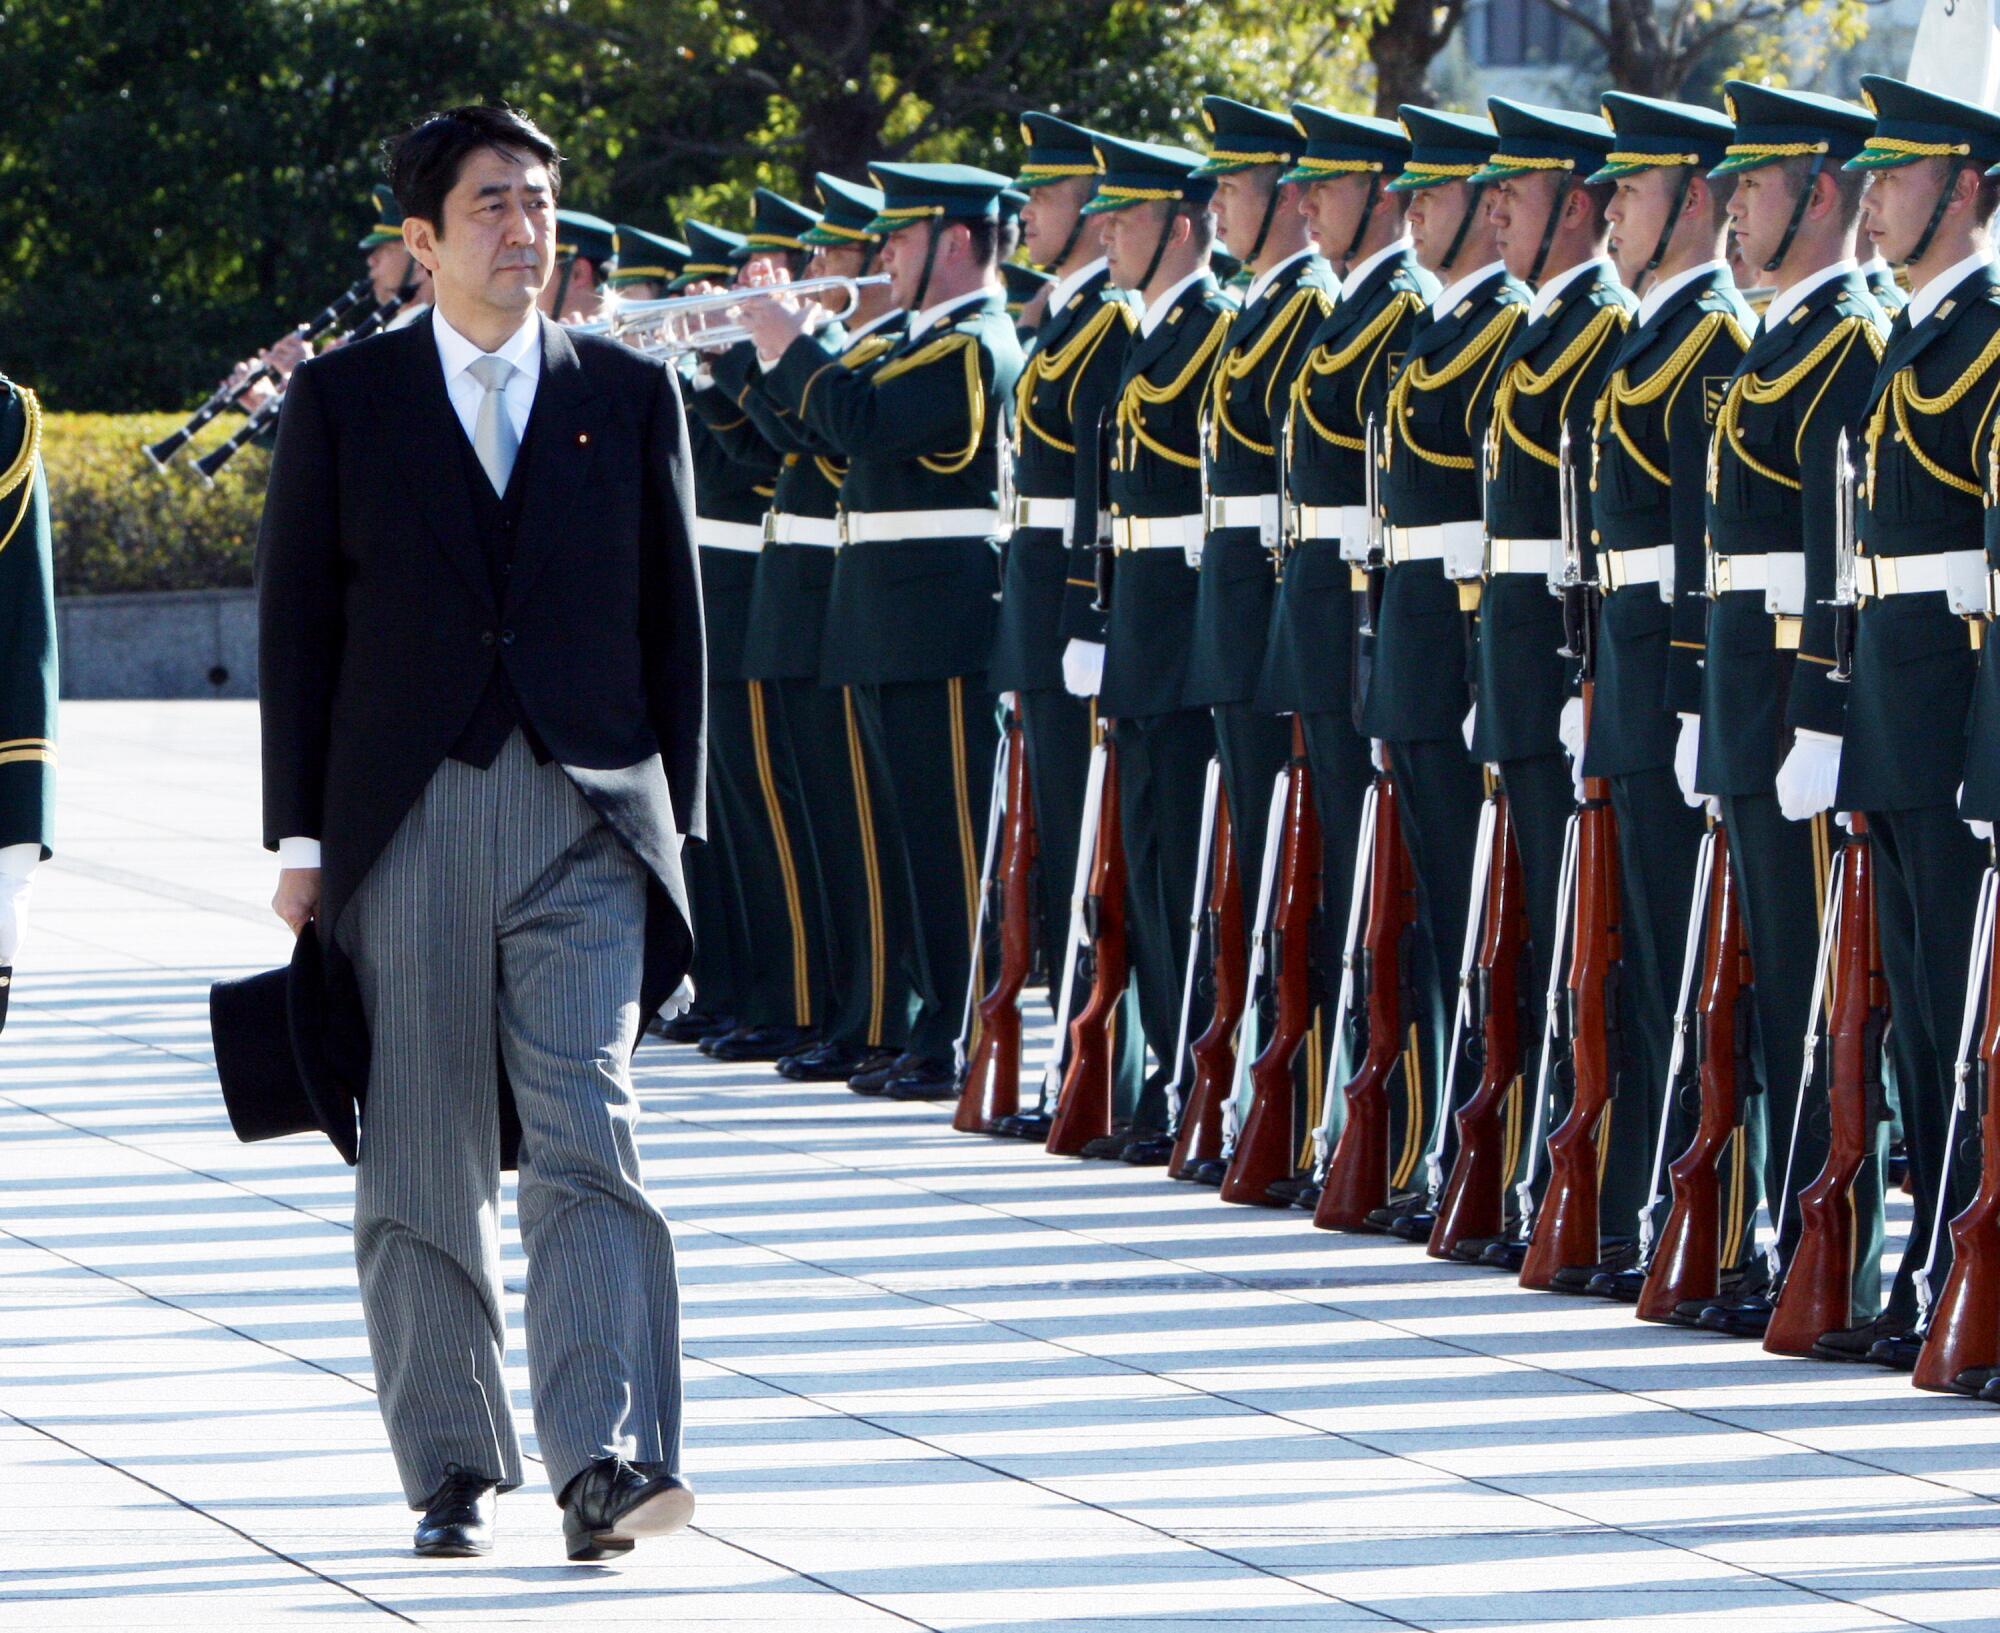 Shinzo Abe, Japan's prime minister, reviews the honor guard at a ceremony for the Ministry of Defense 